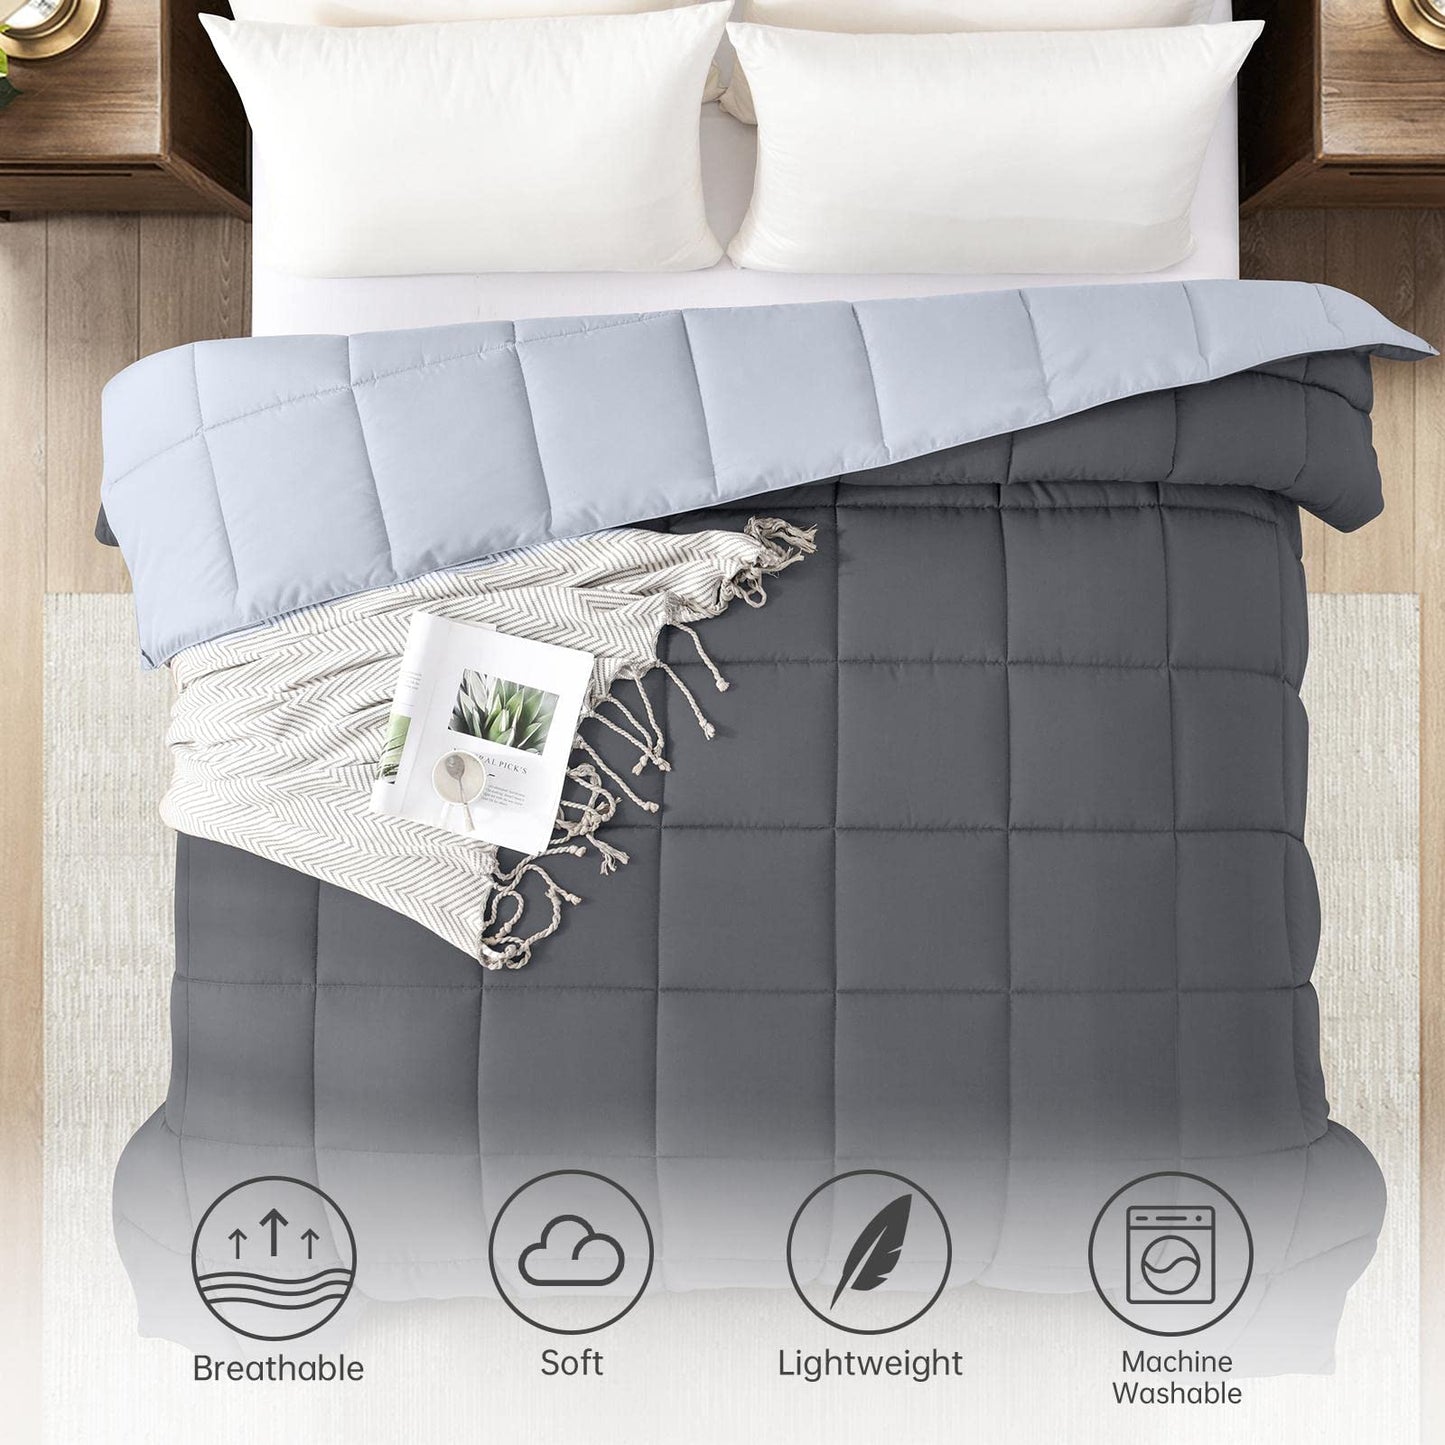 Homelike Moment Lightweight Twin Comforter - Grey Down Alternative Comforters Twin Size Bed, All Season Duvet Insert Quilted Reversible Bedding Comforter Soft Cozy Twin Size Dark Gray/Light Grey